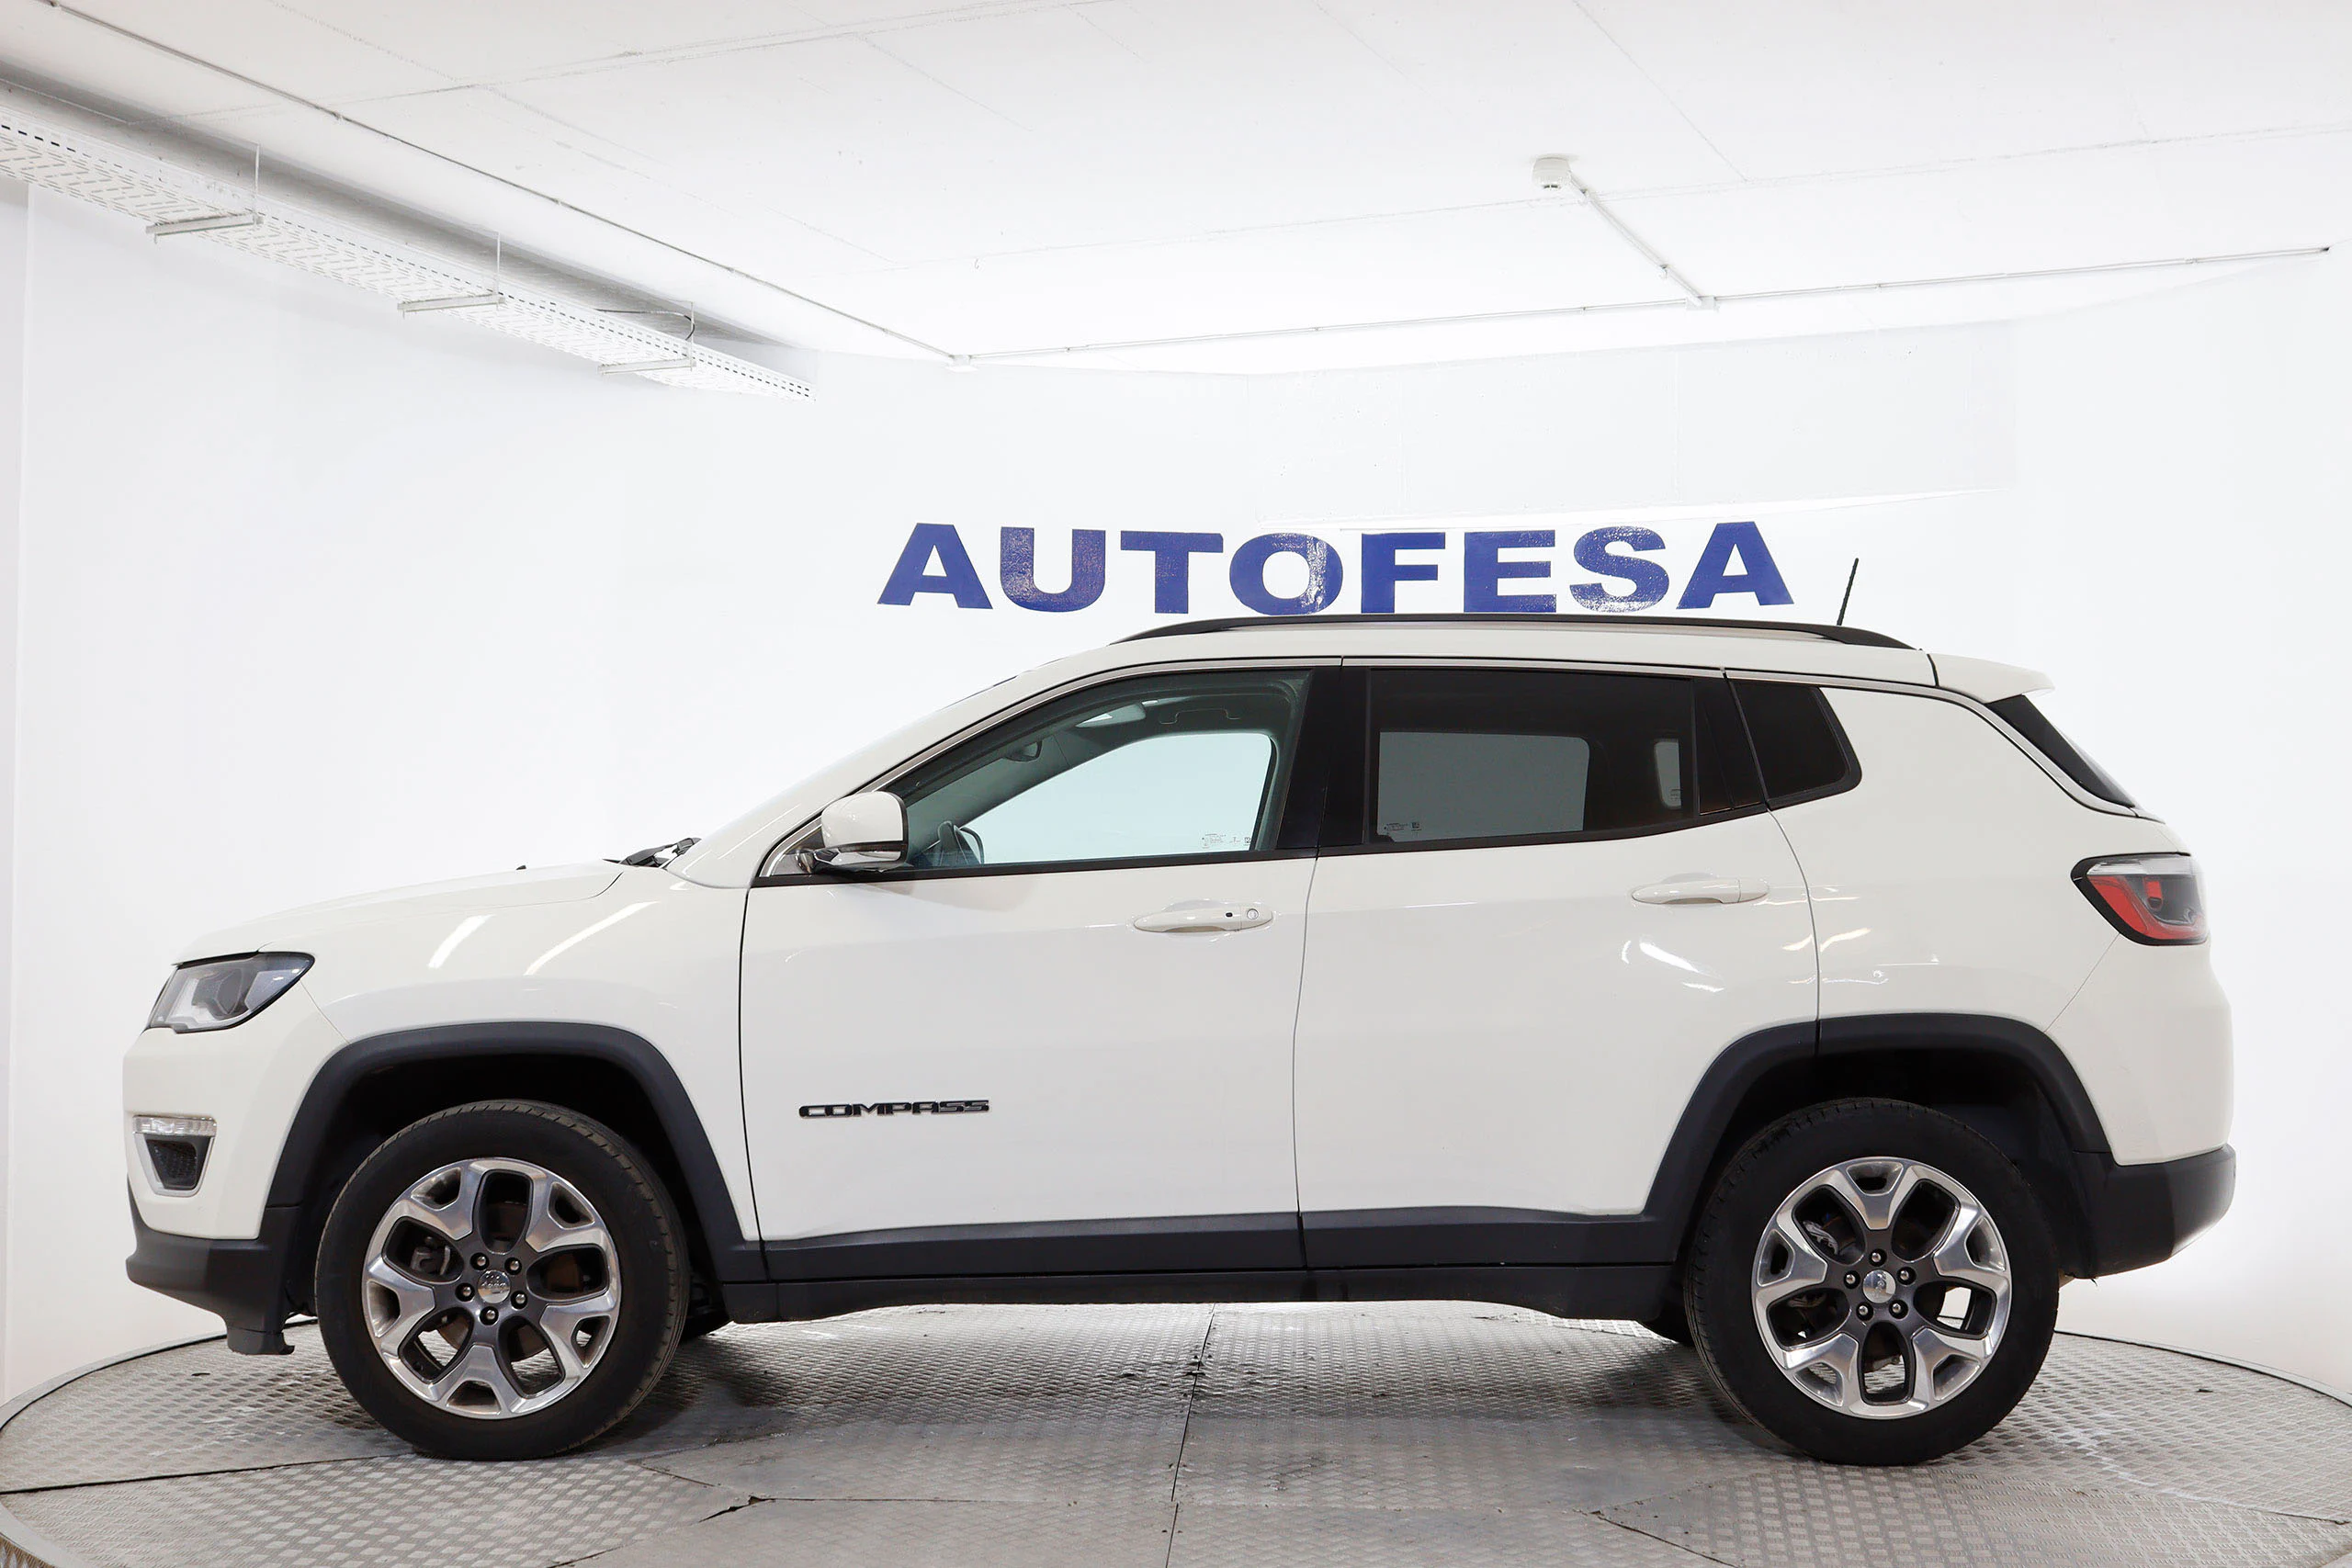 Jeep Compass 2.0 Limited 4X4 170cv Auto 5P S/S # IVA DEDUCIBLE, NAVY, FAROS LED, PARKTRONIC - Foto 5